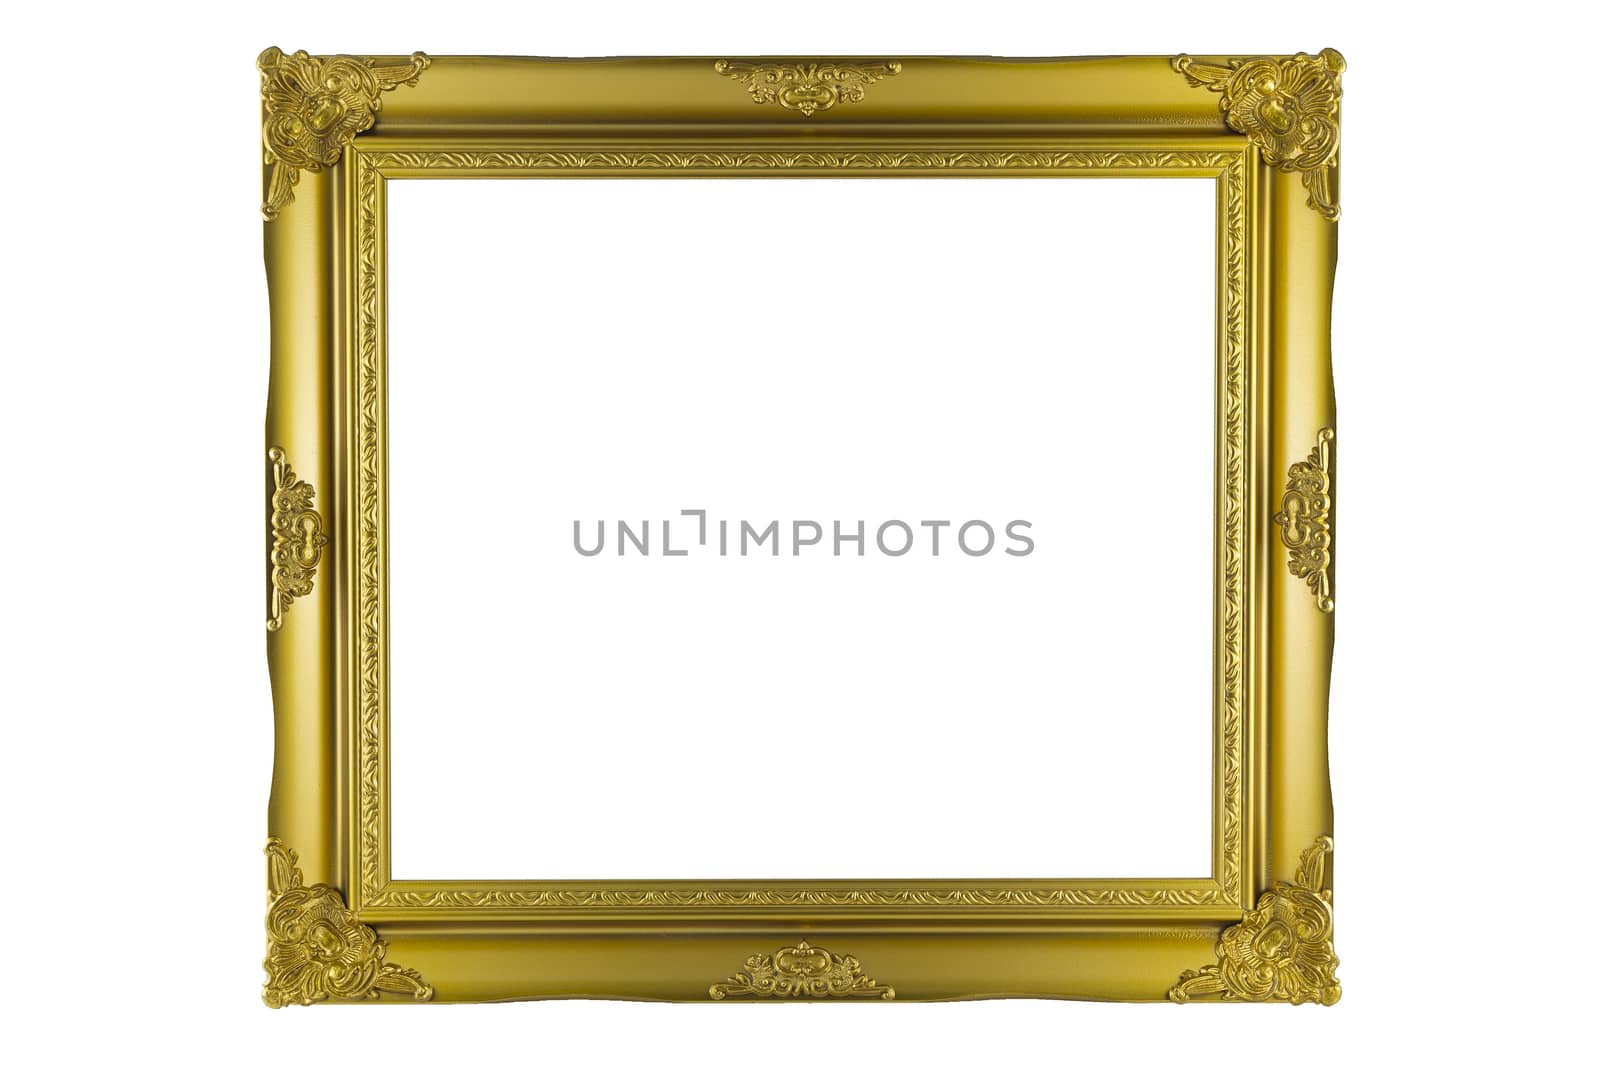 Bronze and Gold Frame vintage isolated on white background.